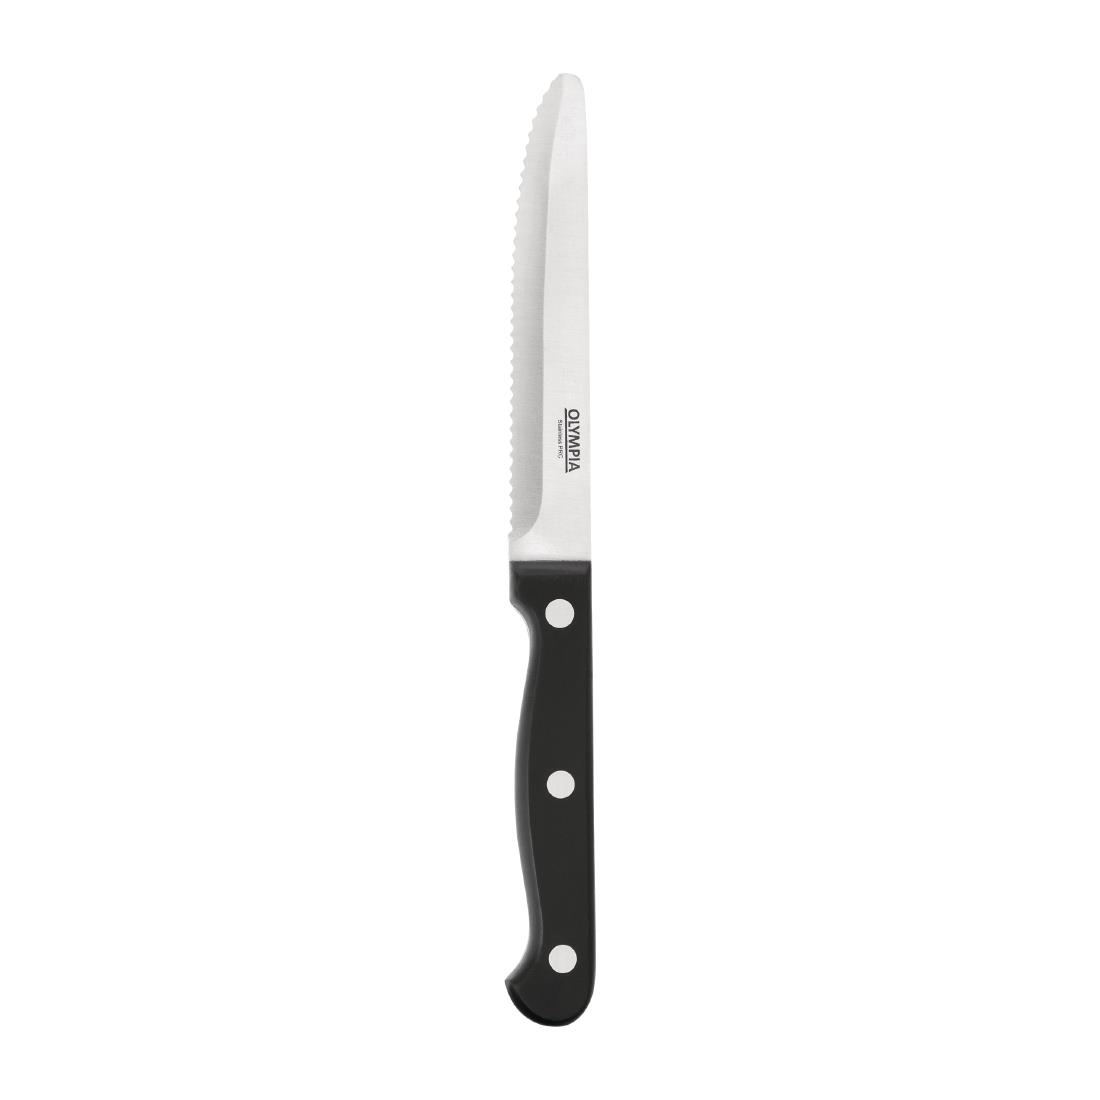 Olympia Rounded Steak Knives Black